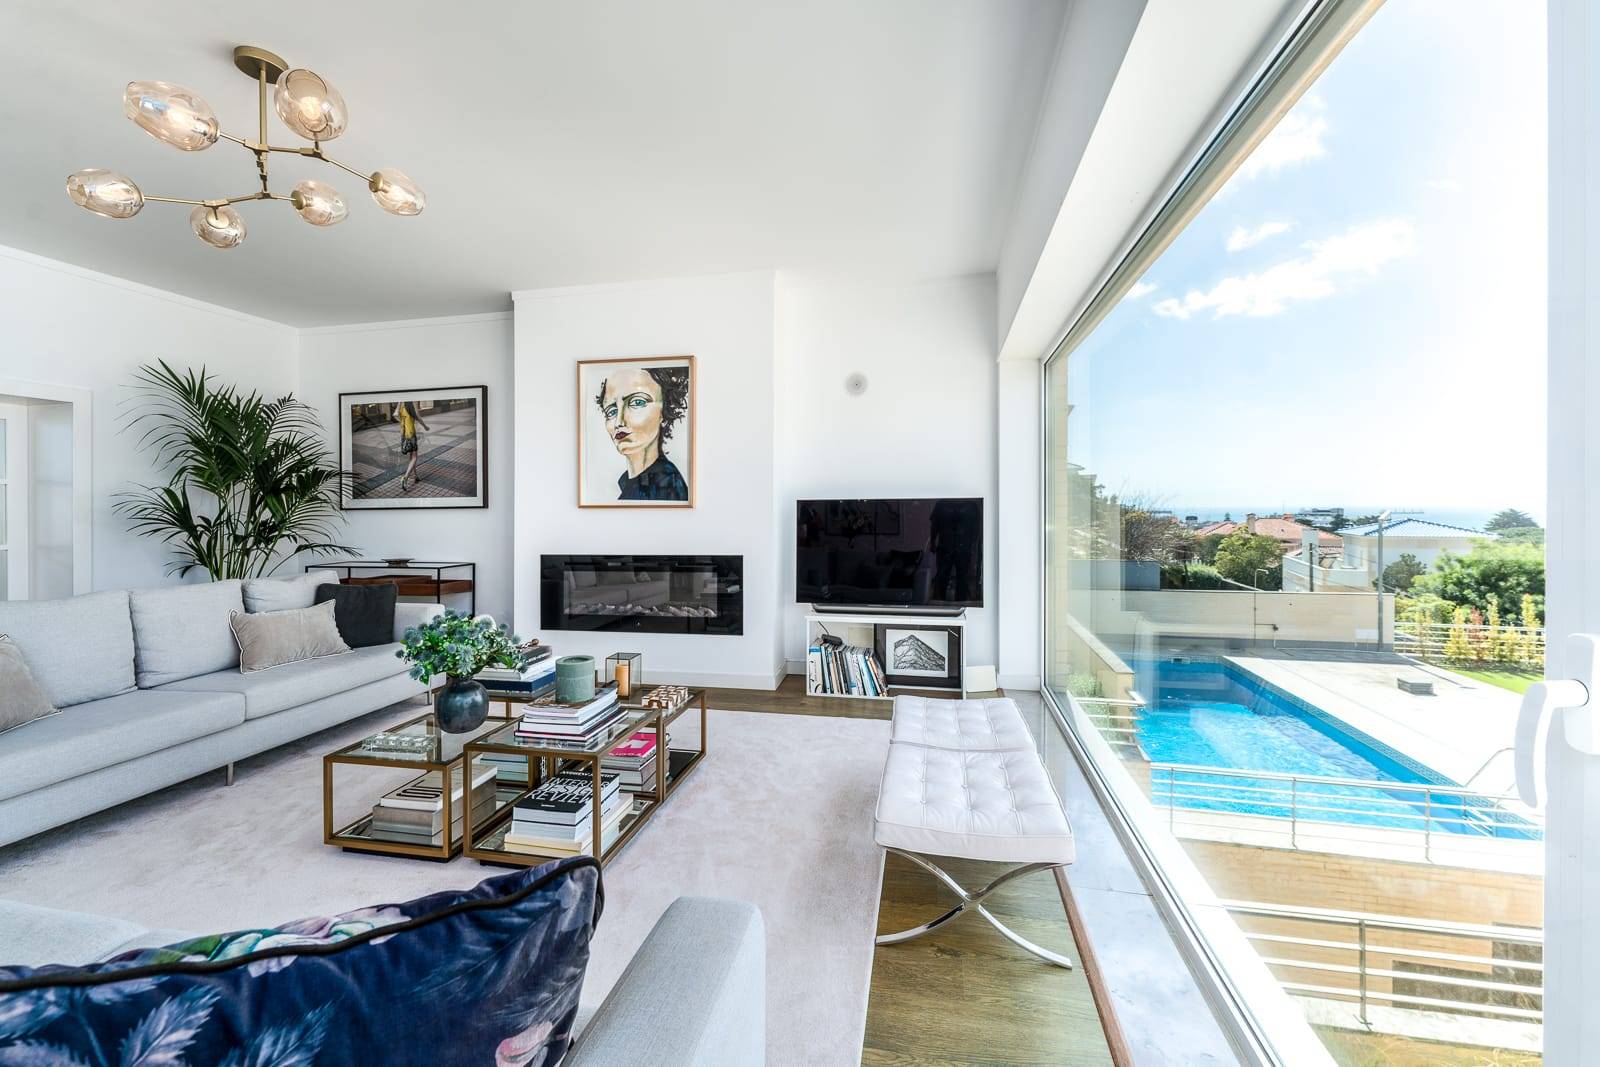 **Luxurious 4-Bedroom Townhouse in the Heart of Estoril – Fully Furnished, Steps from the Beach